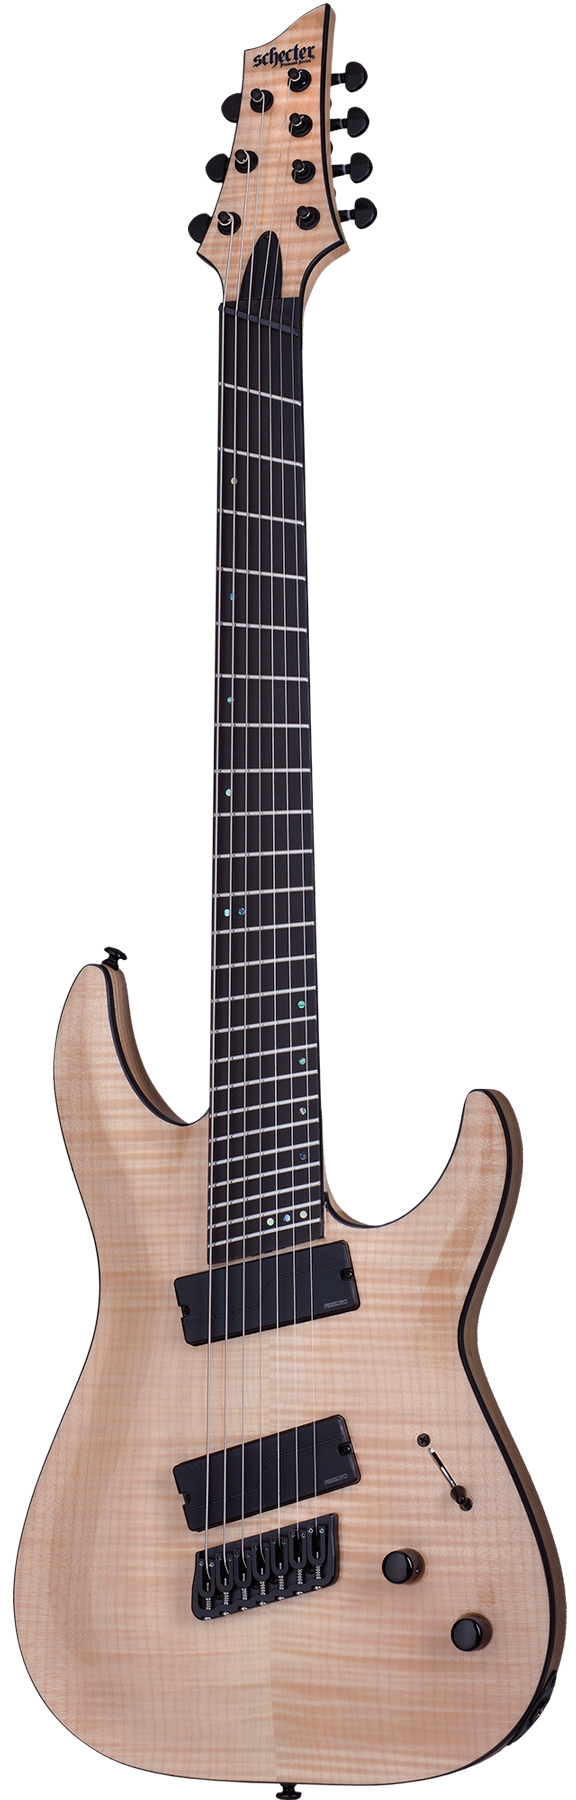 An image of Schecter C-7 SLS Elite Multi Scale Gloss Natural | PMT Online